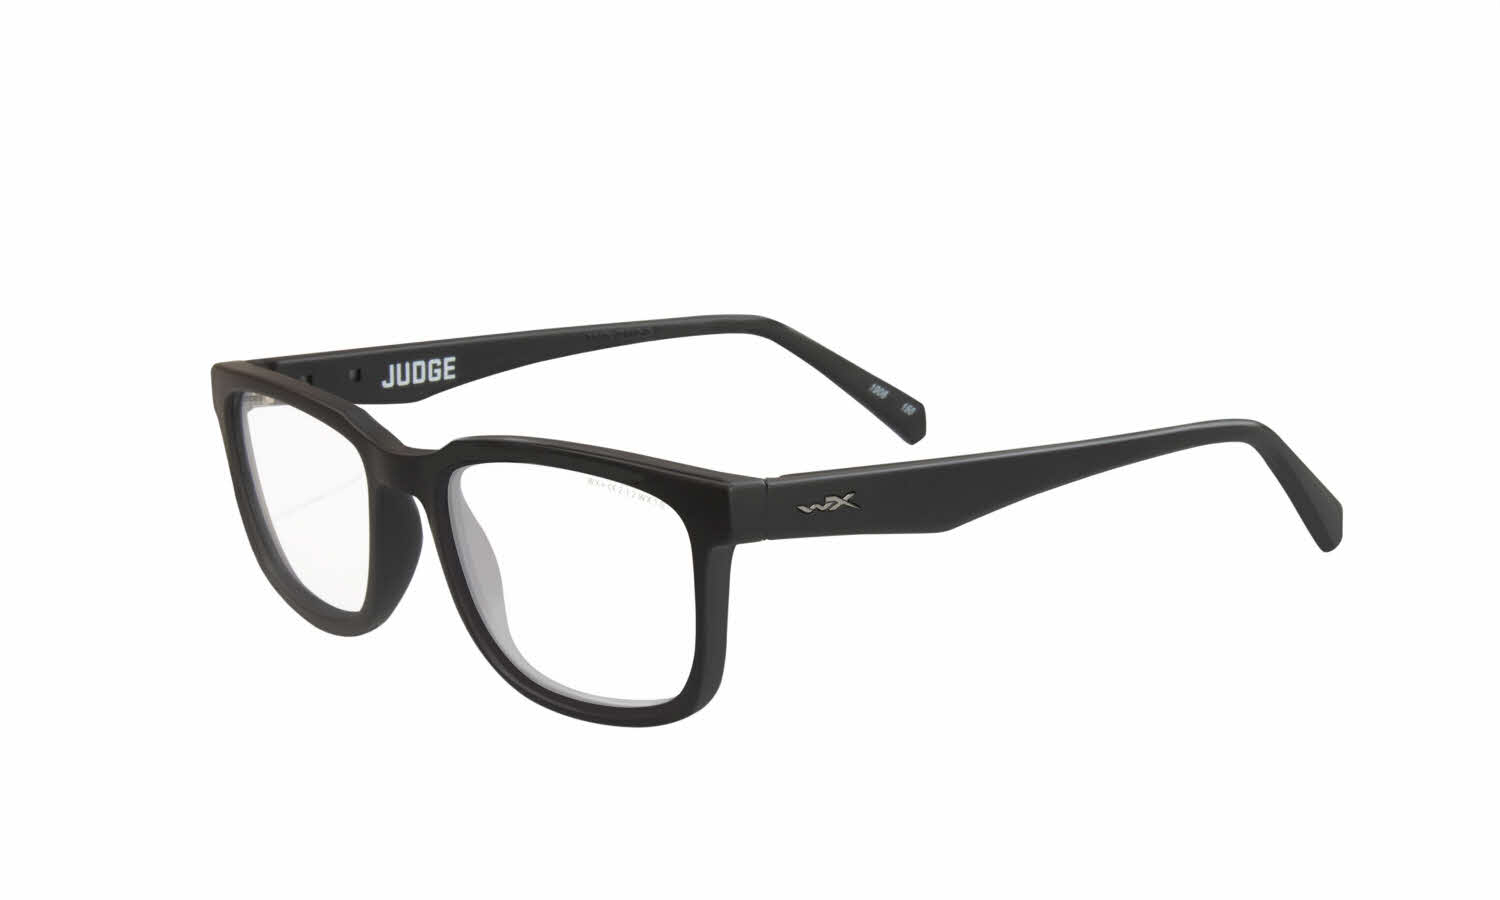 Wiley X® celebrates 30 years by unveiling three new eyewear styles for 2017, 2017-01-31